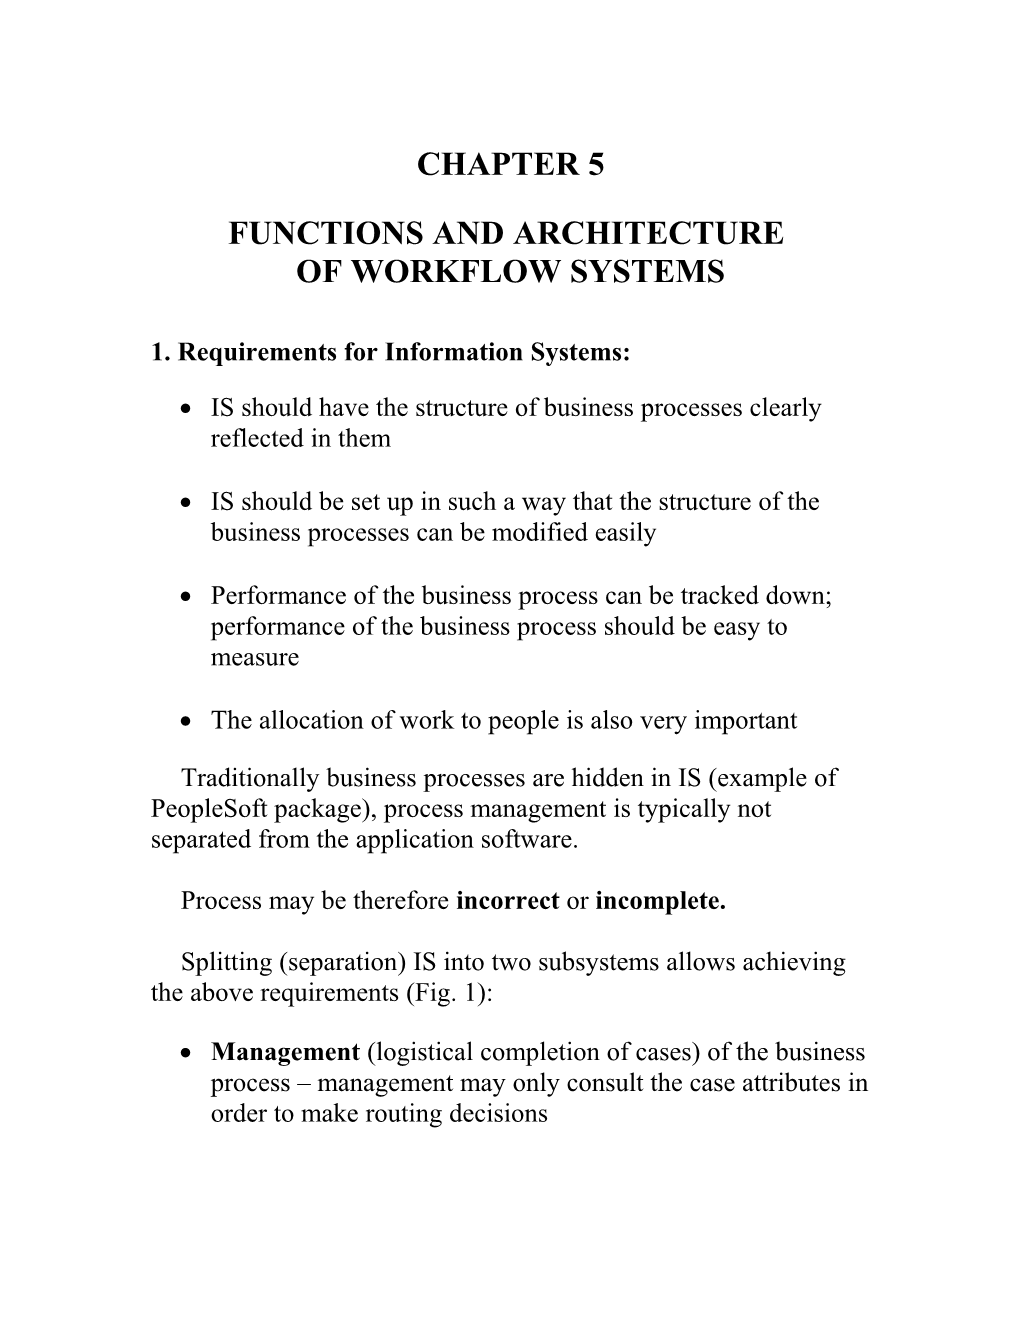 1. Requirements for Information Systems